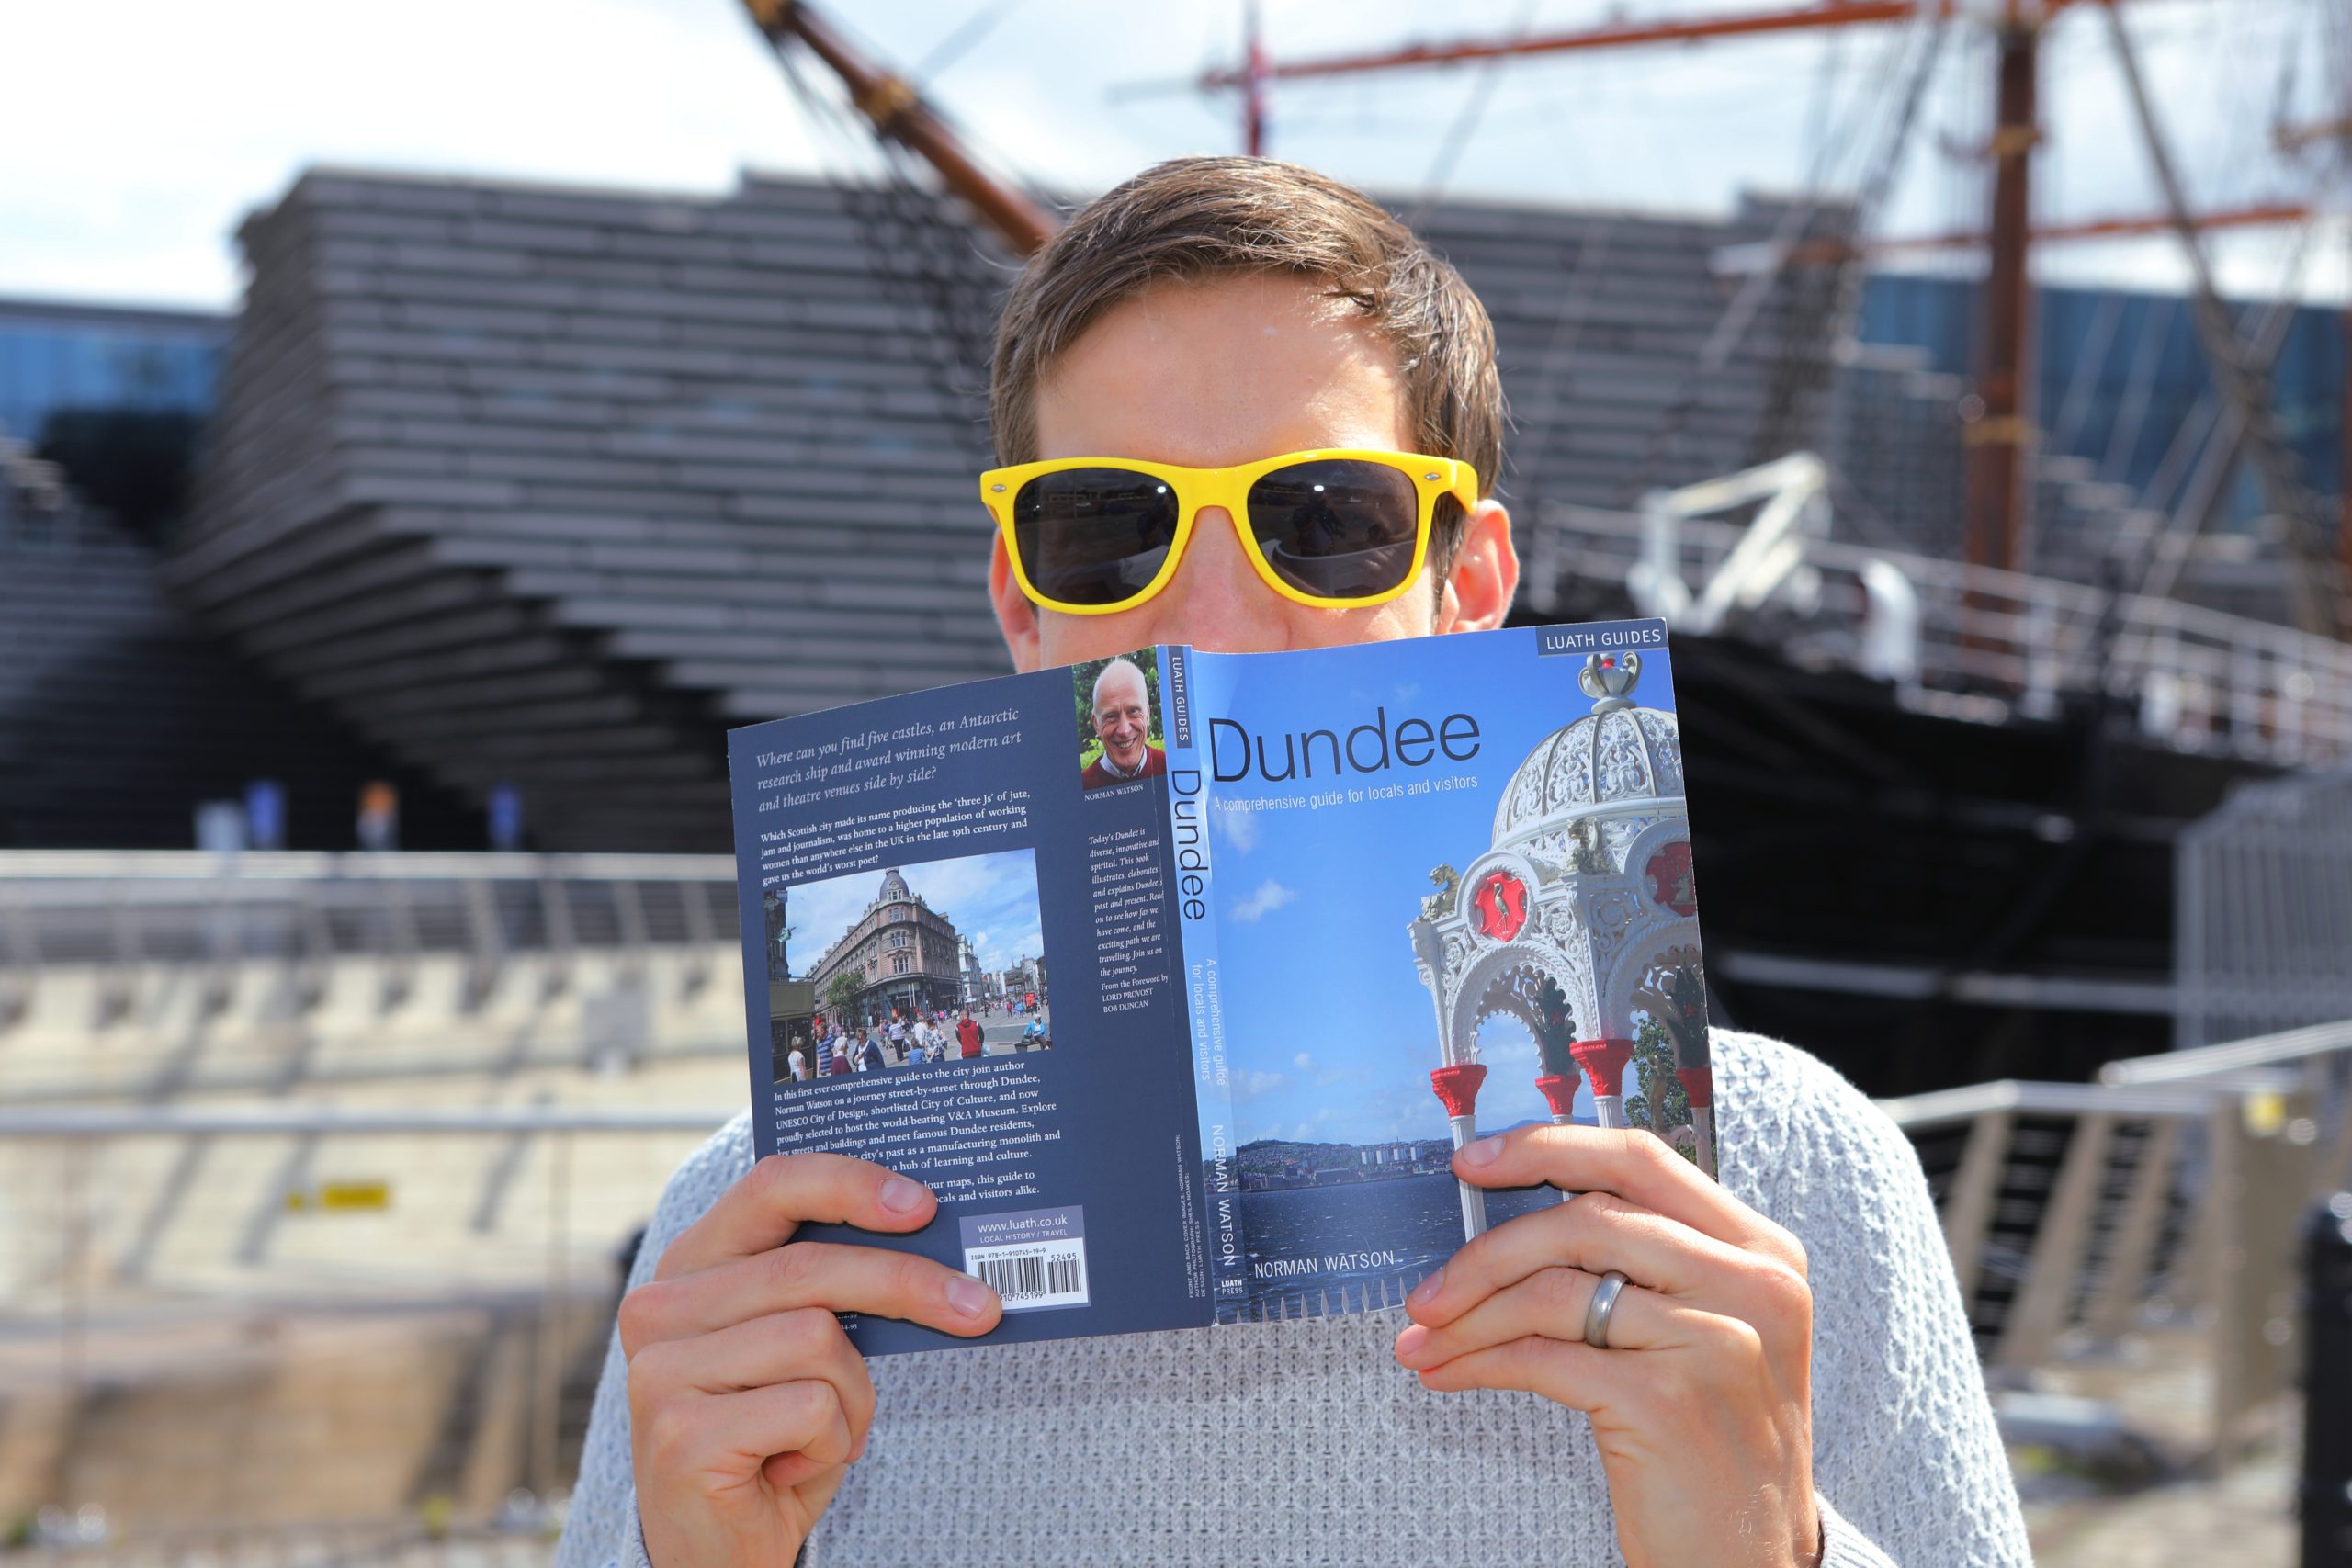 Dundee City Council leader John Alexander wants Dundee to benefit from a staycation boom